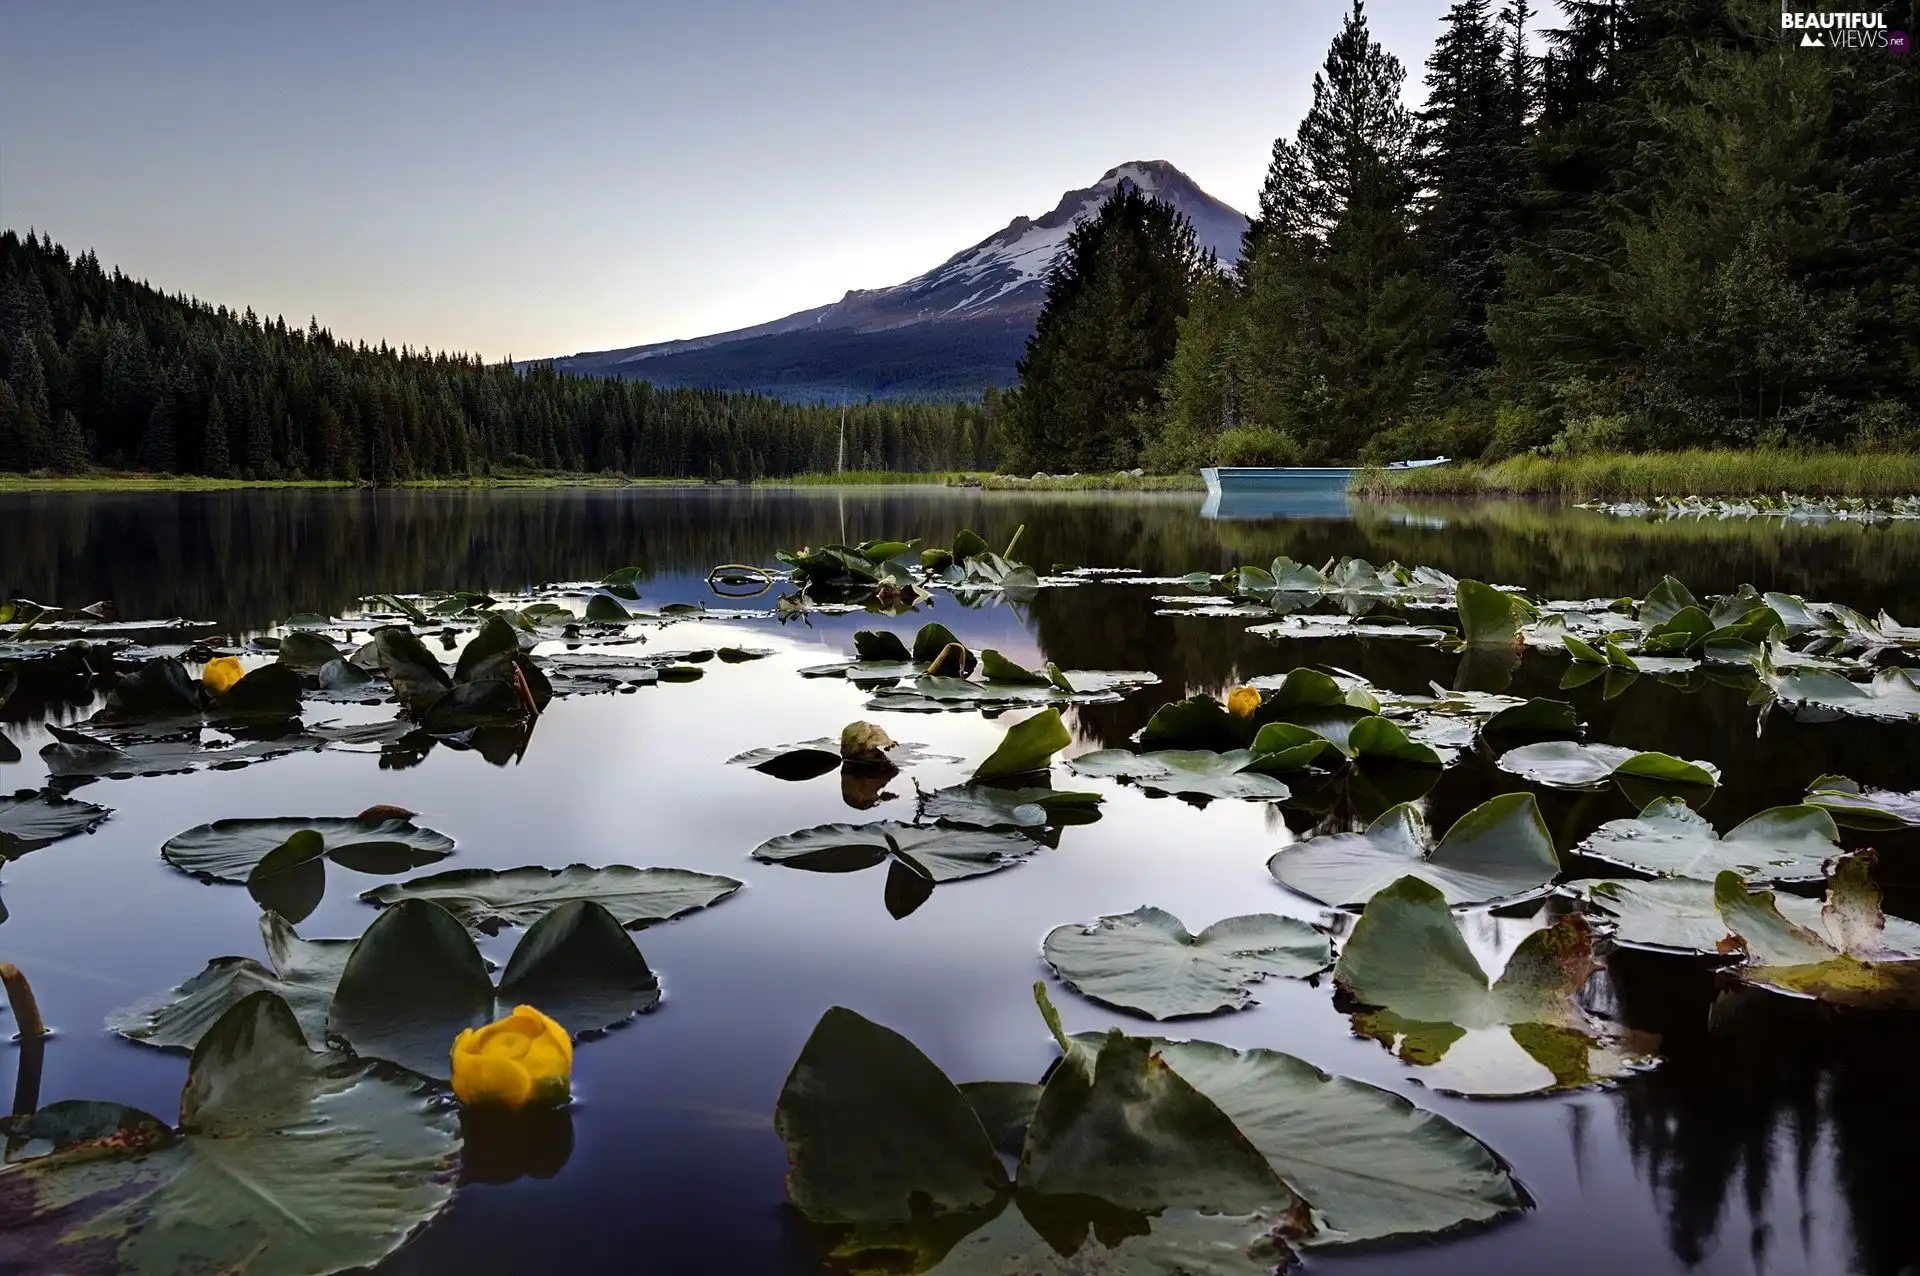 water lily, lake, Mountains, forest, Boat, Leaf